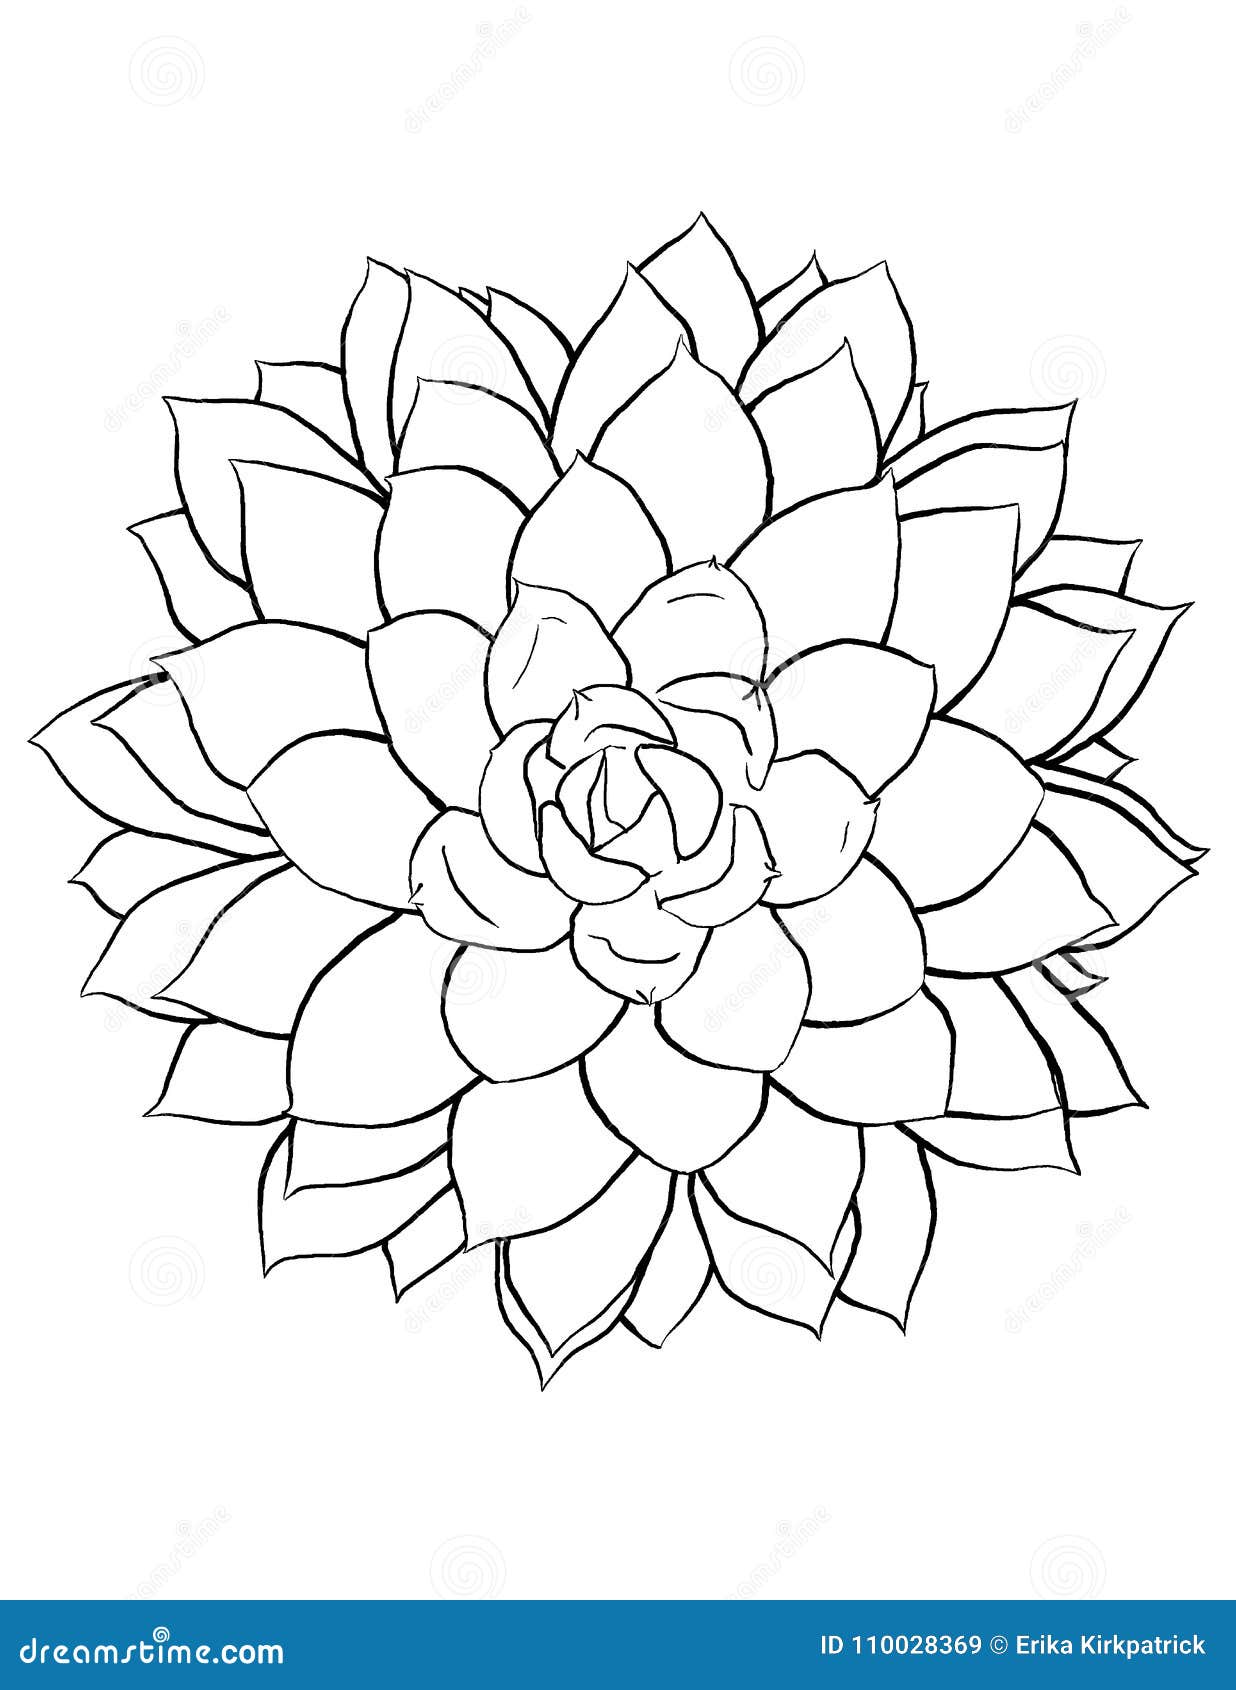 What Does Succulent Tattoo Mean  Represent Symbolism